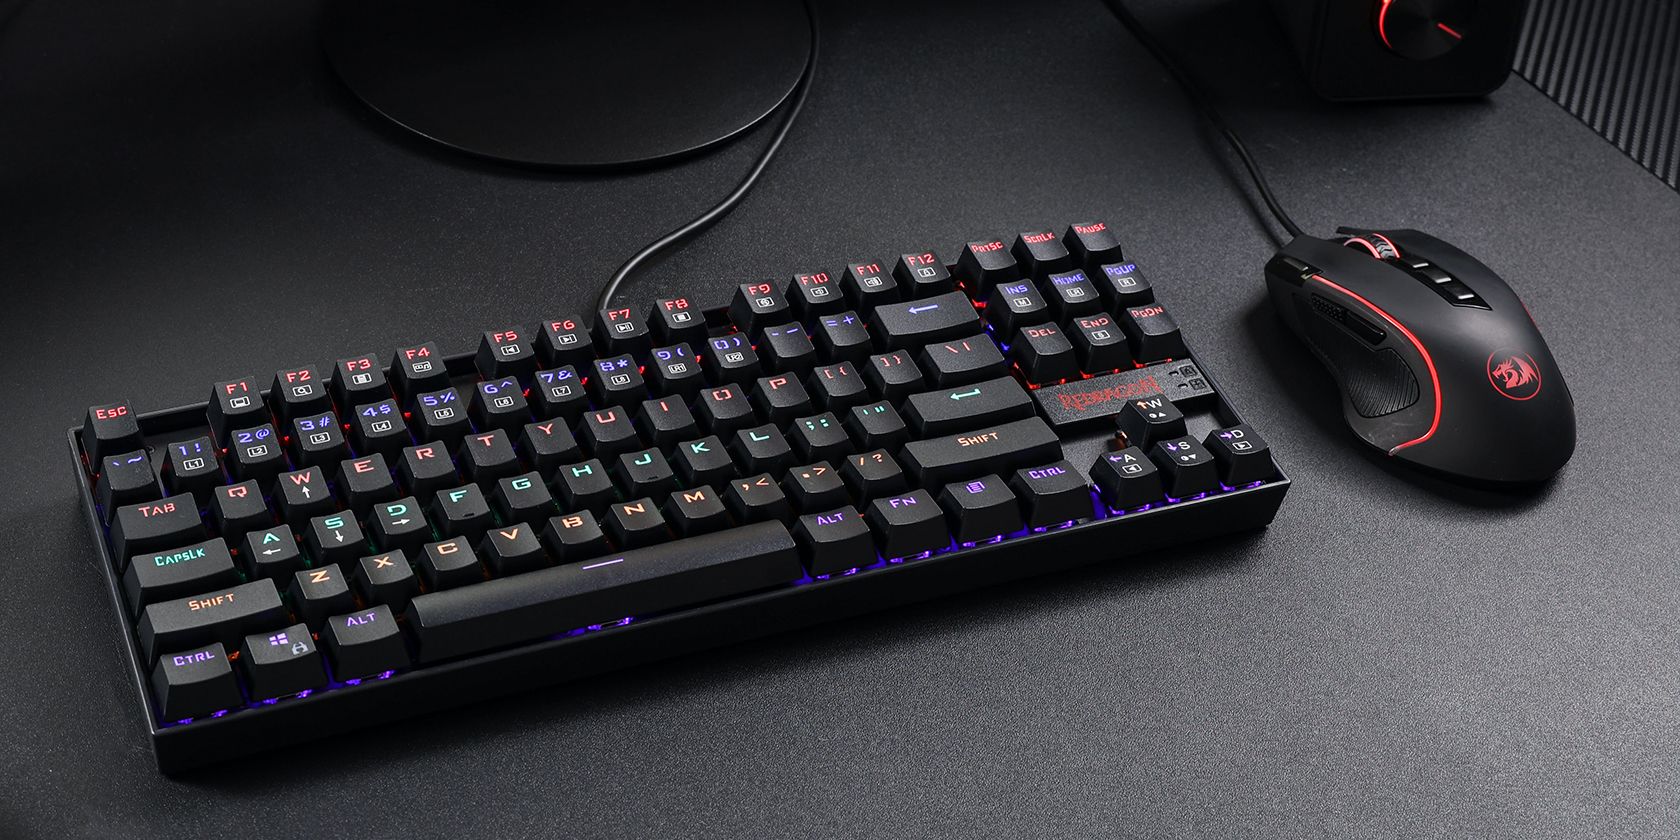 a gaming keyboard and mouse from Redragon